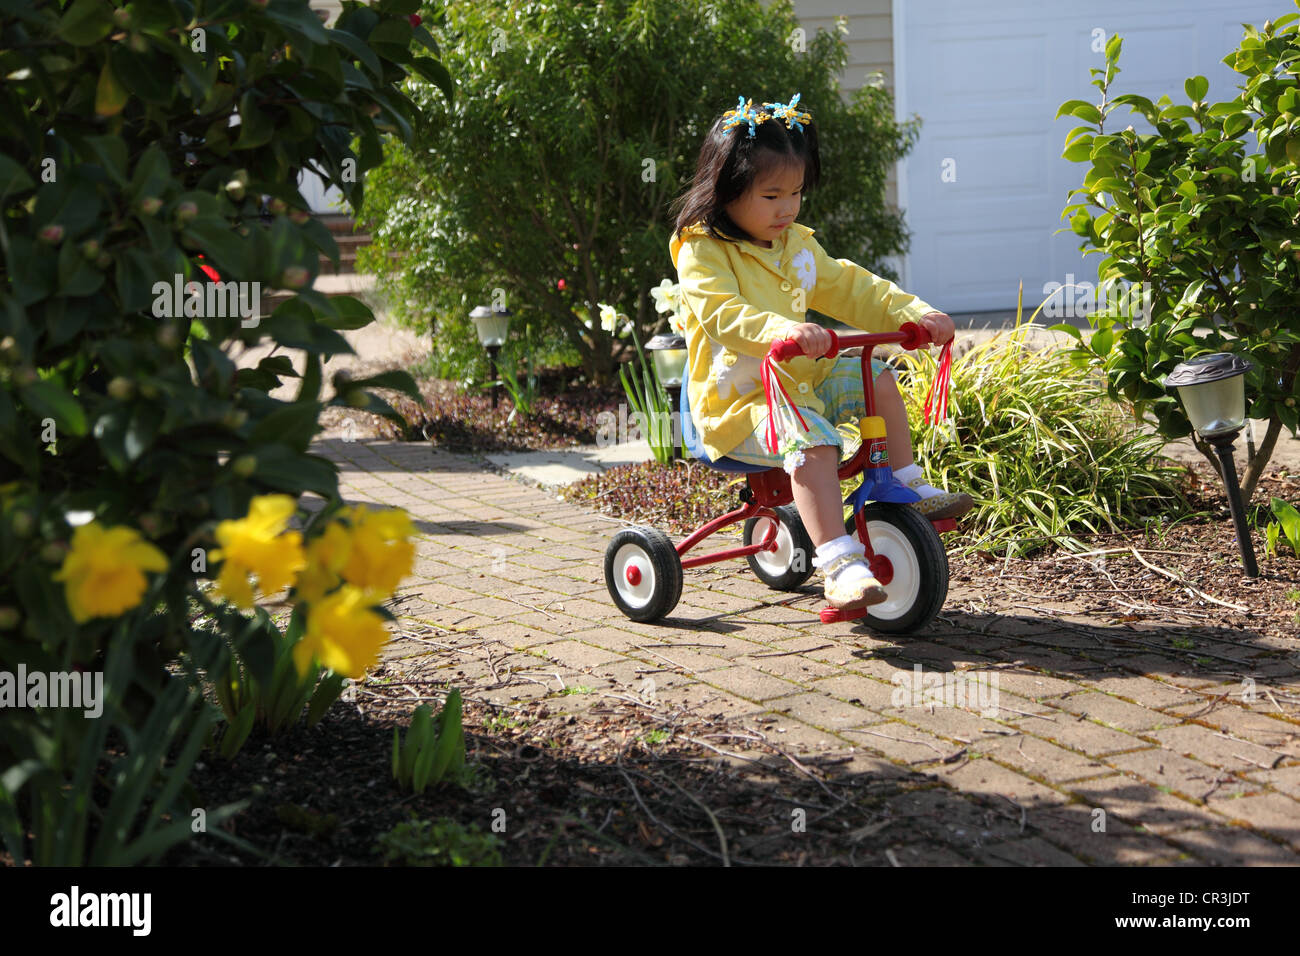 Young girl riding tricycle Stock Photo